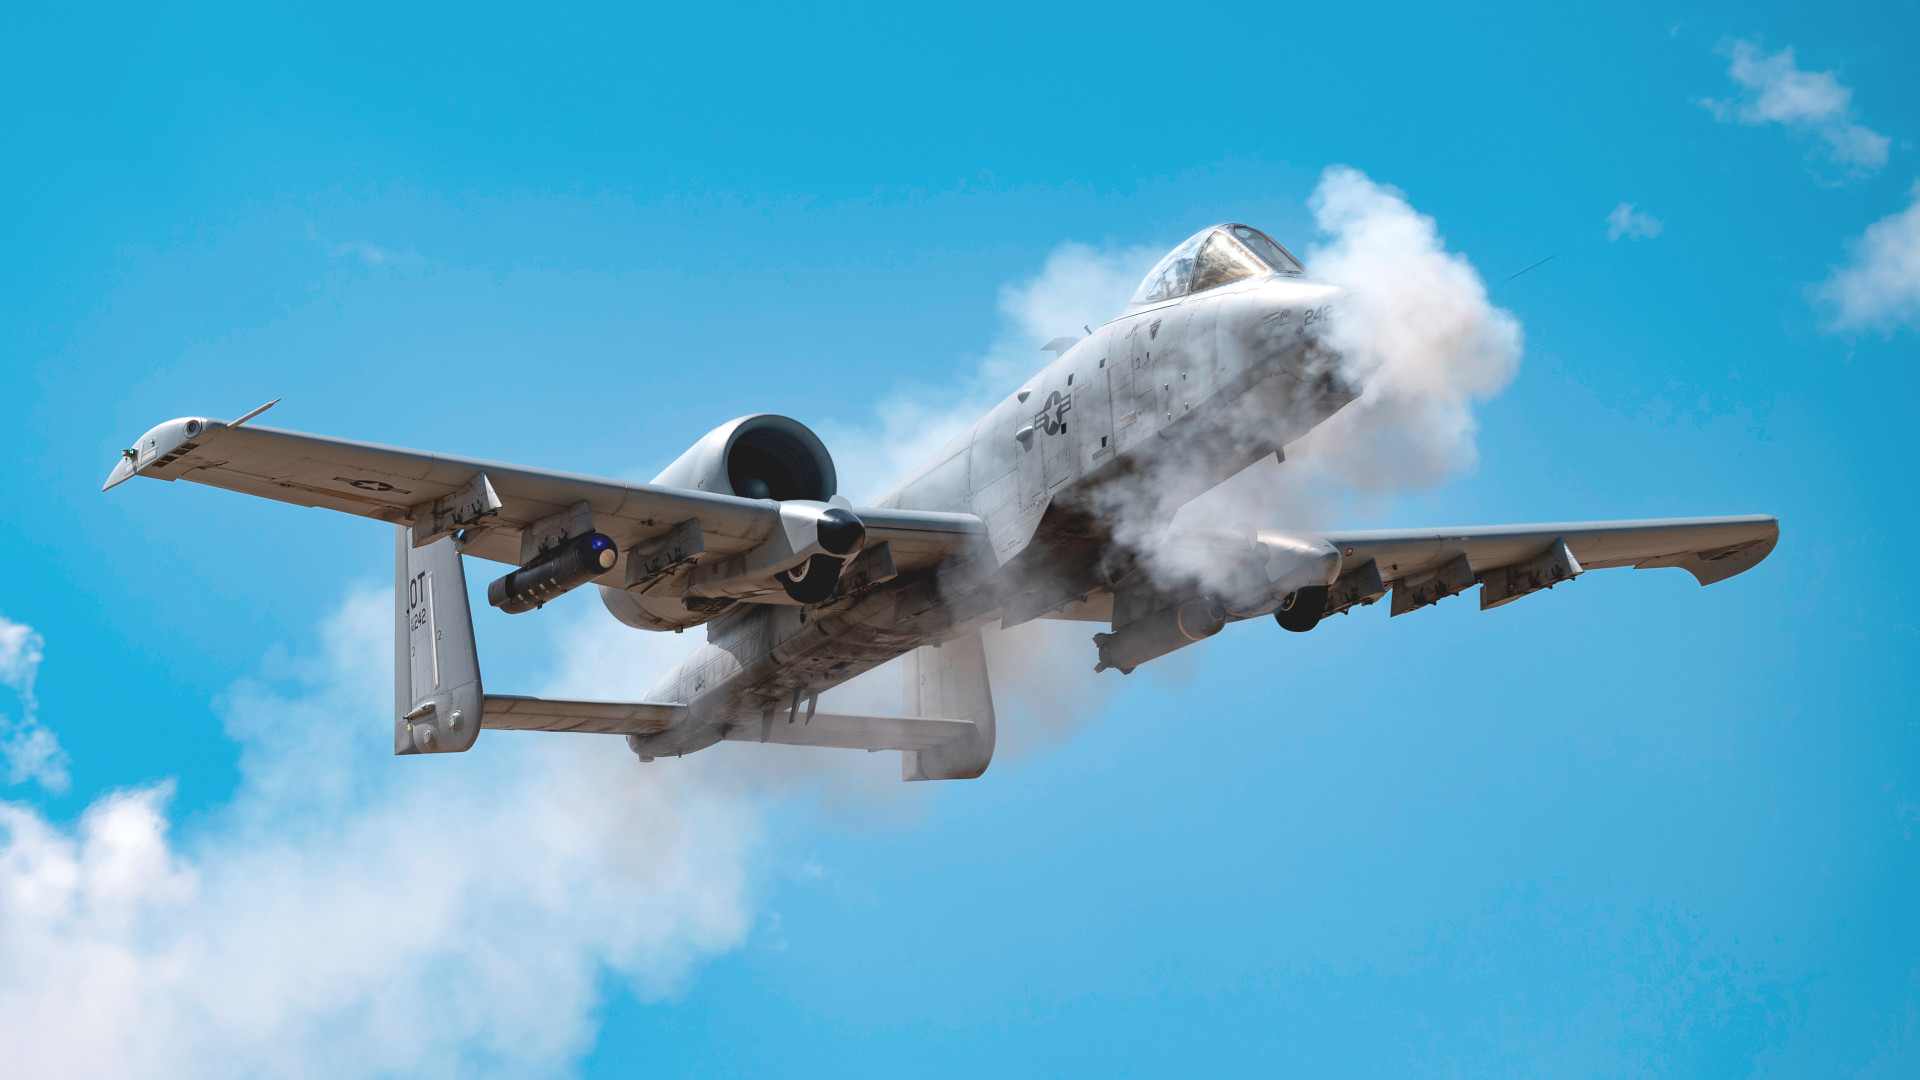 The A-10 Warthog's ɡᴜп can fігe 3,900 rounds per minute.